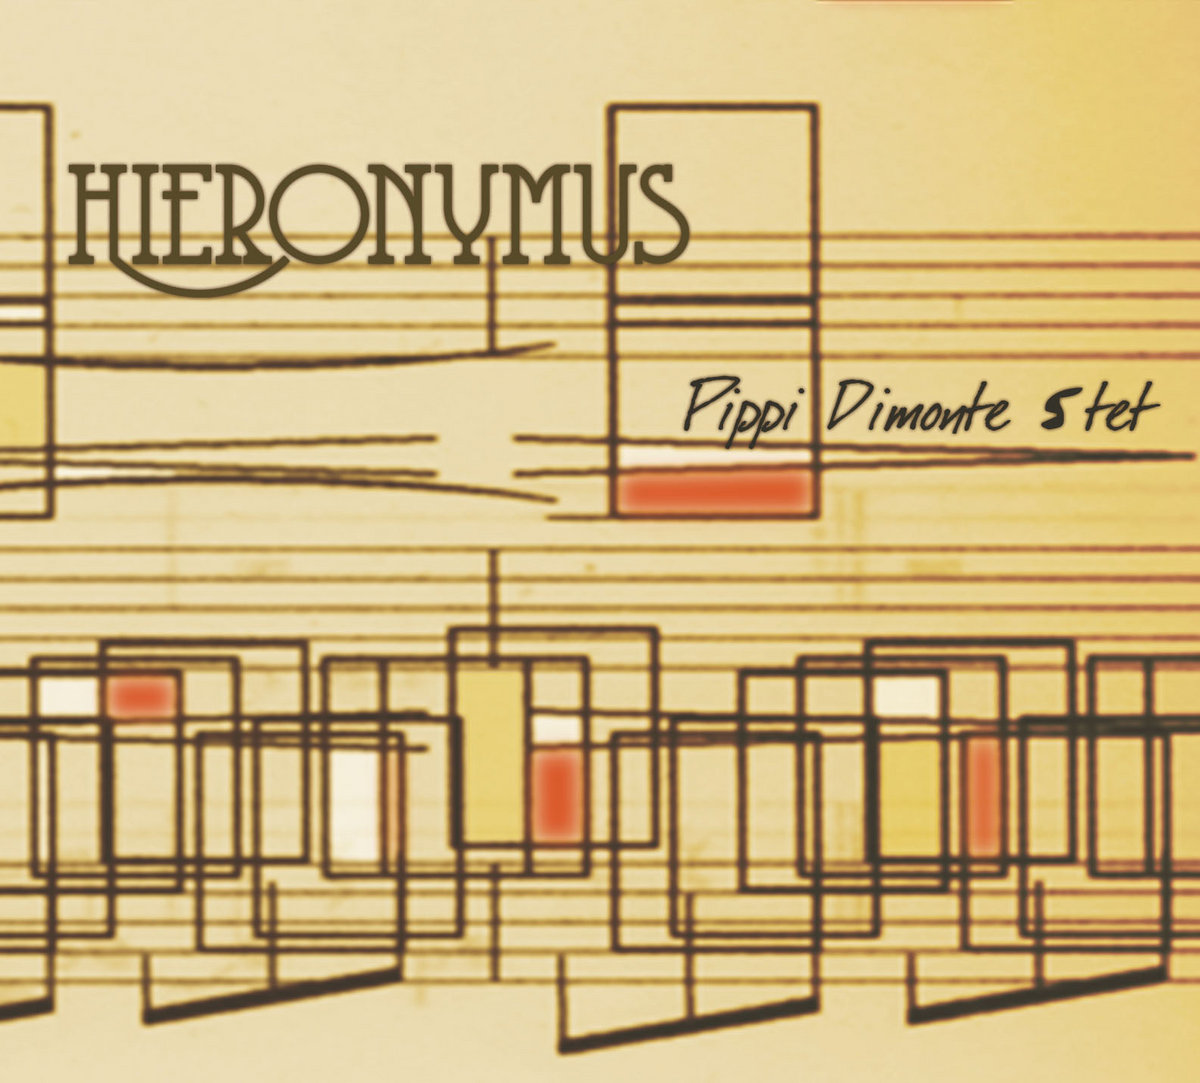 Hieronymus by Pippi Dimonte